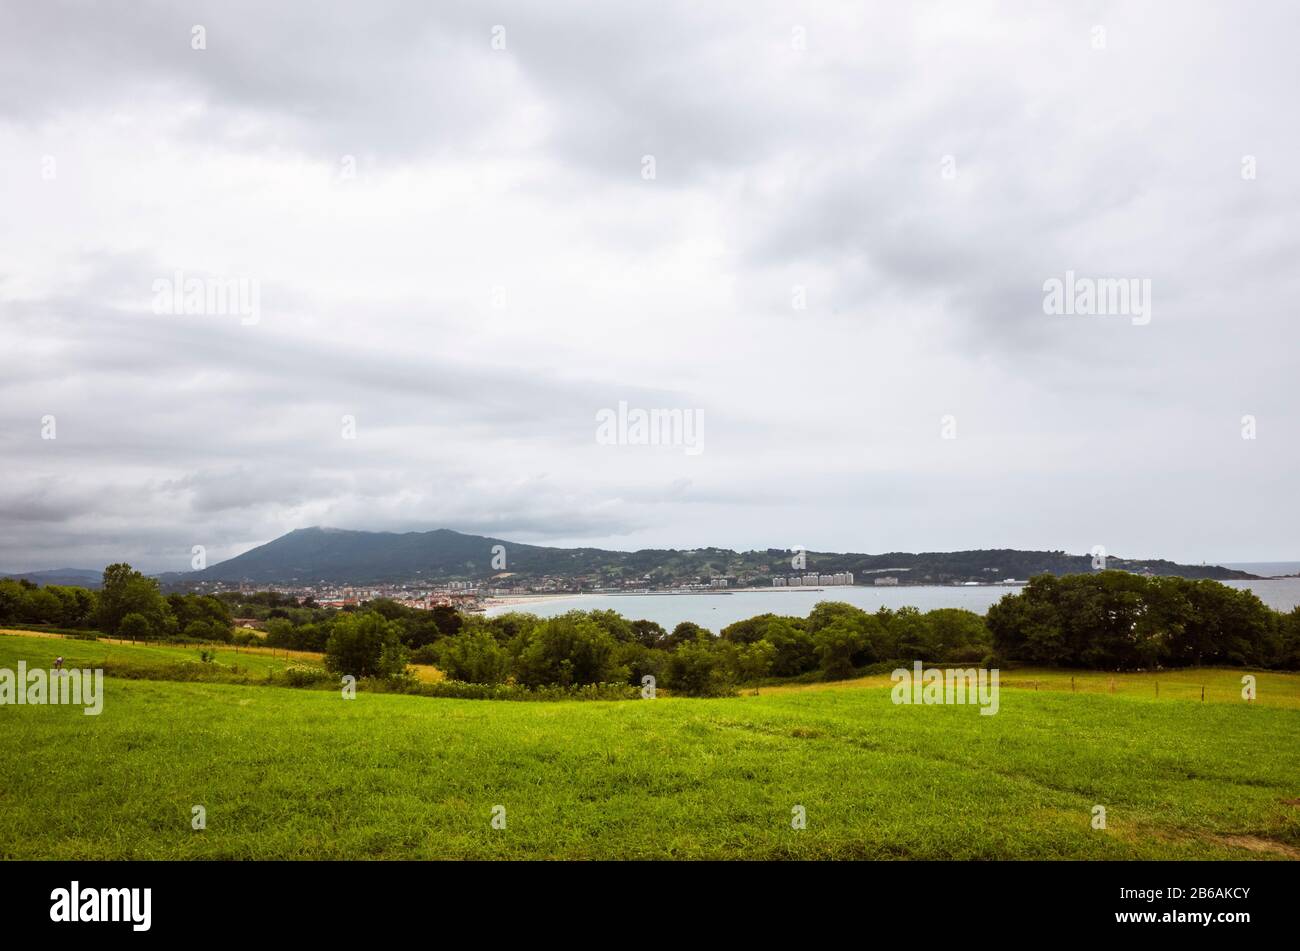 Hendaye, French Basque Country, France - July 13th, 2019 : Bay of Txingudi on the French bank of the estuary of the Bidasoa river, as seen from the ga Stock Photo